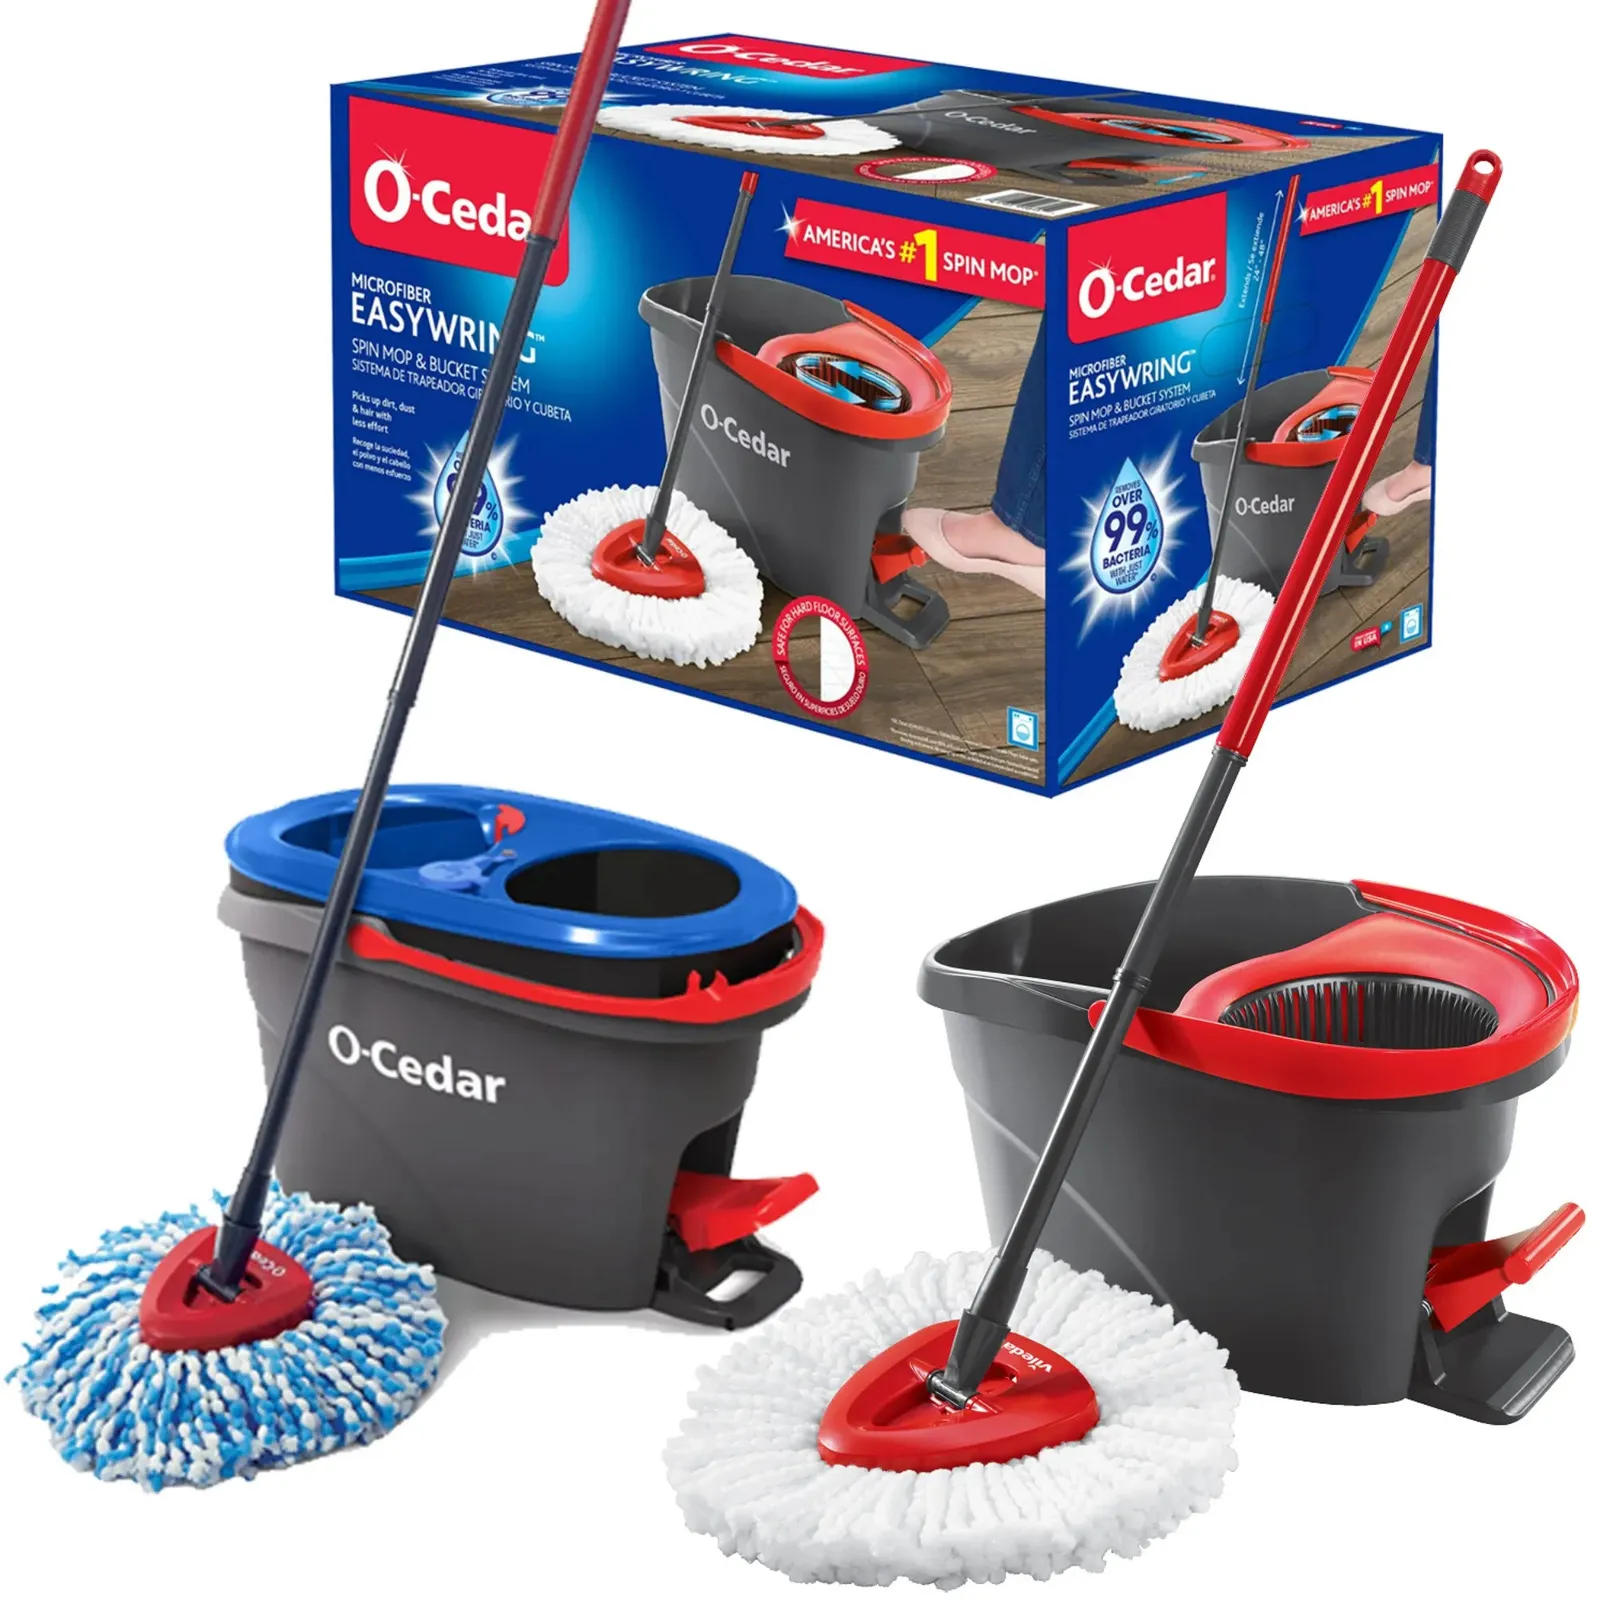 MOPS FOO FOON DEPED PEDAL Spin Mop System Free 231206